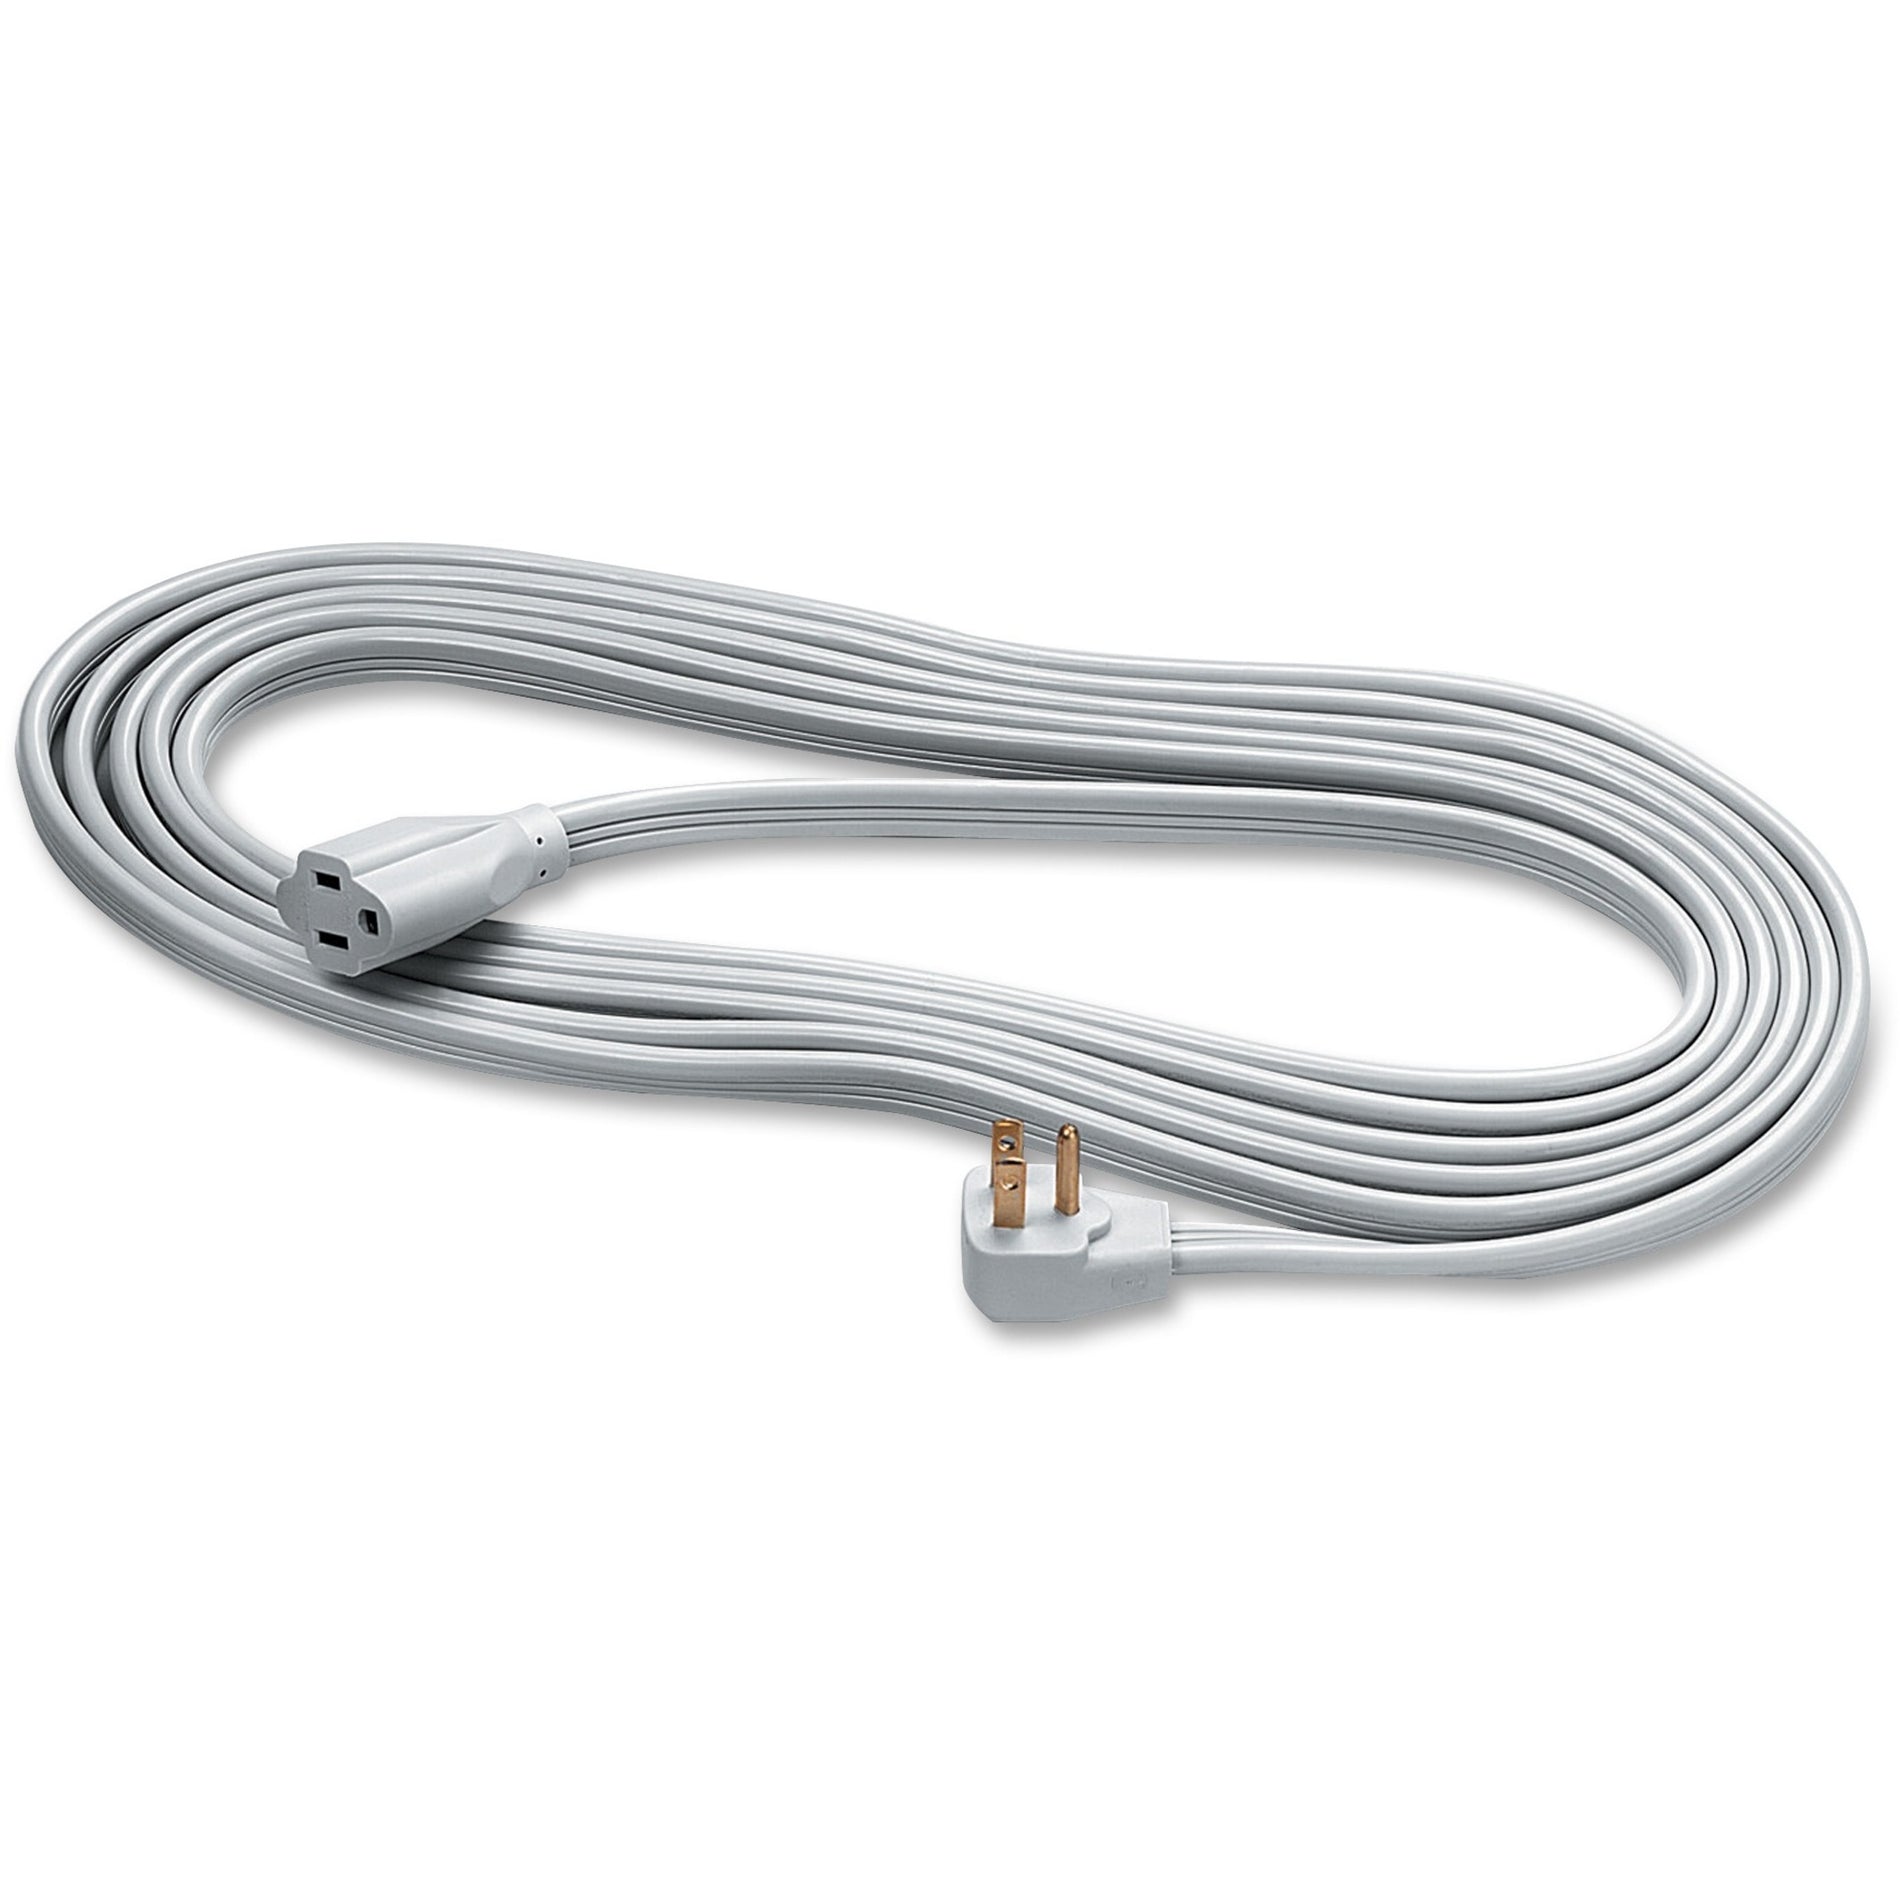 Fellowes 99596 Heavy-Duty Indoor 15' Extension Cord, 14-Gauge, 15 Amp, Gray